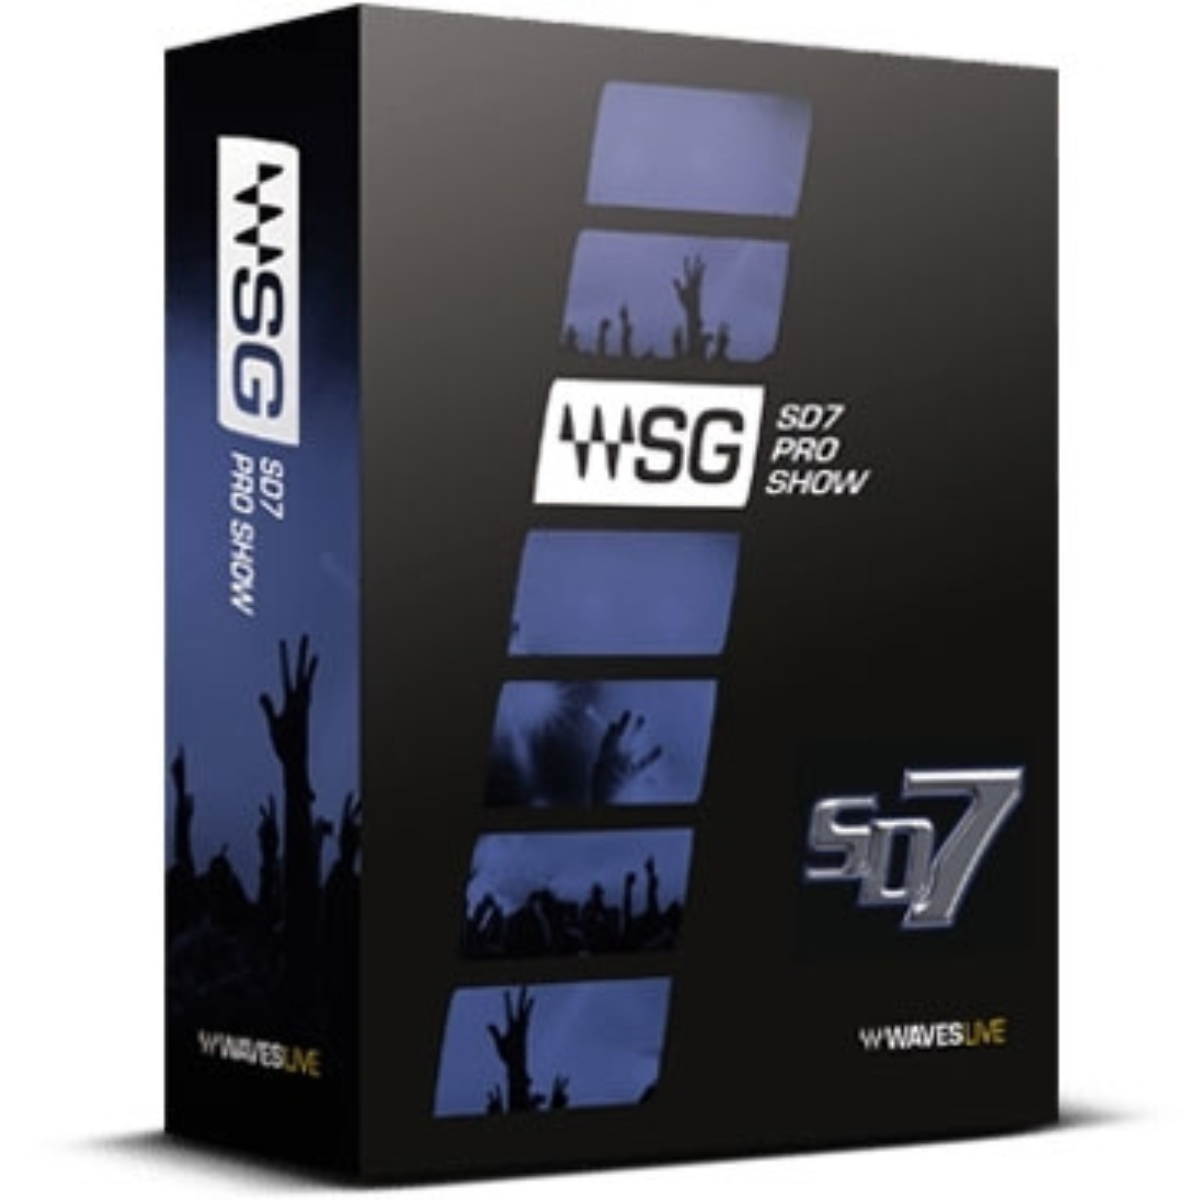 Waves SD7 Pro Show Complete Plug-in Bundle